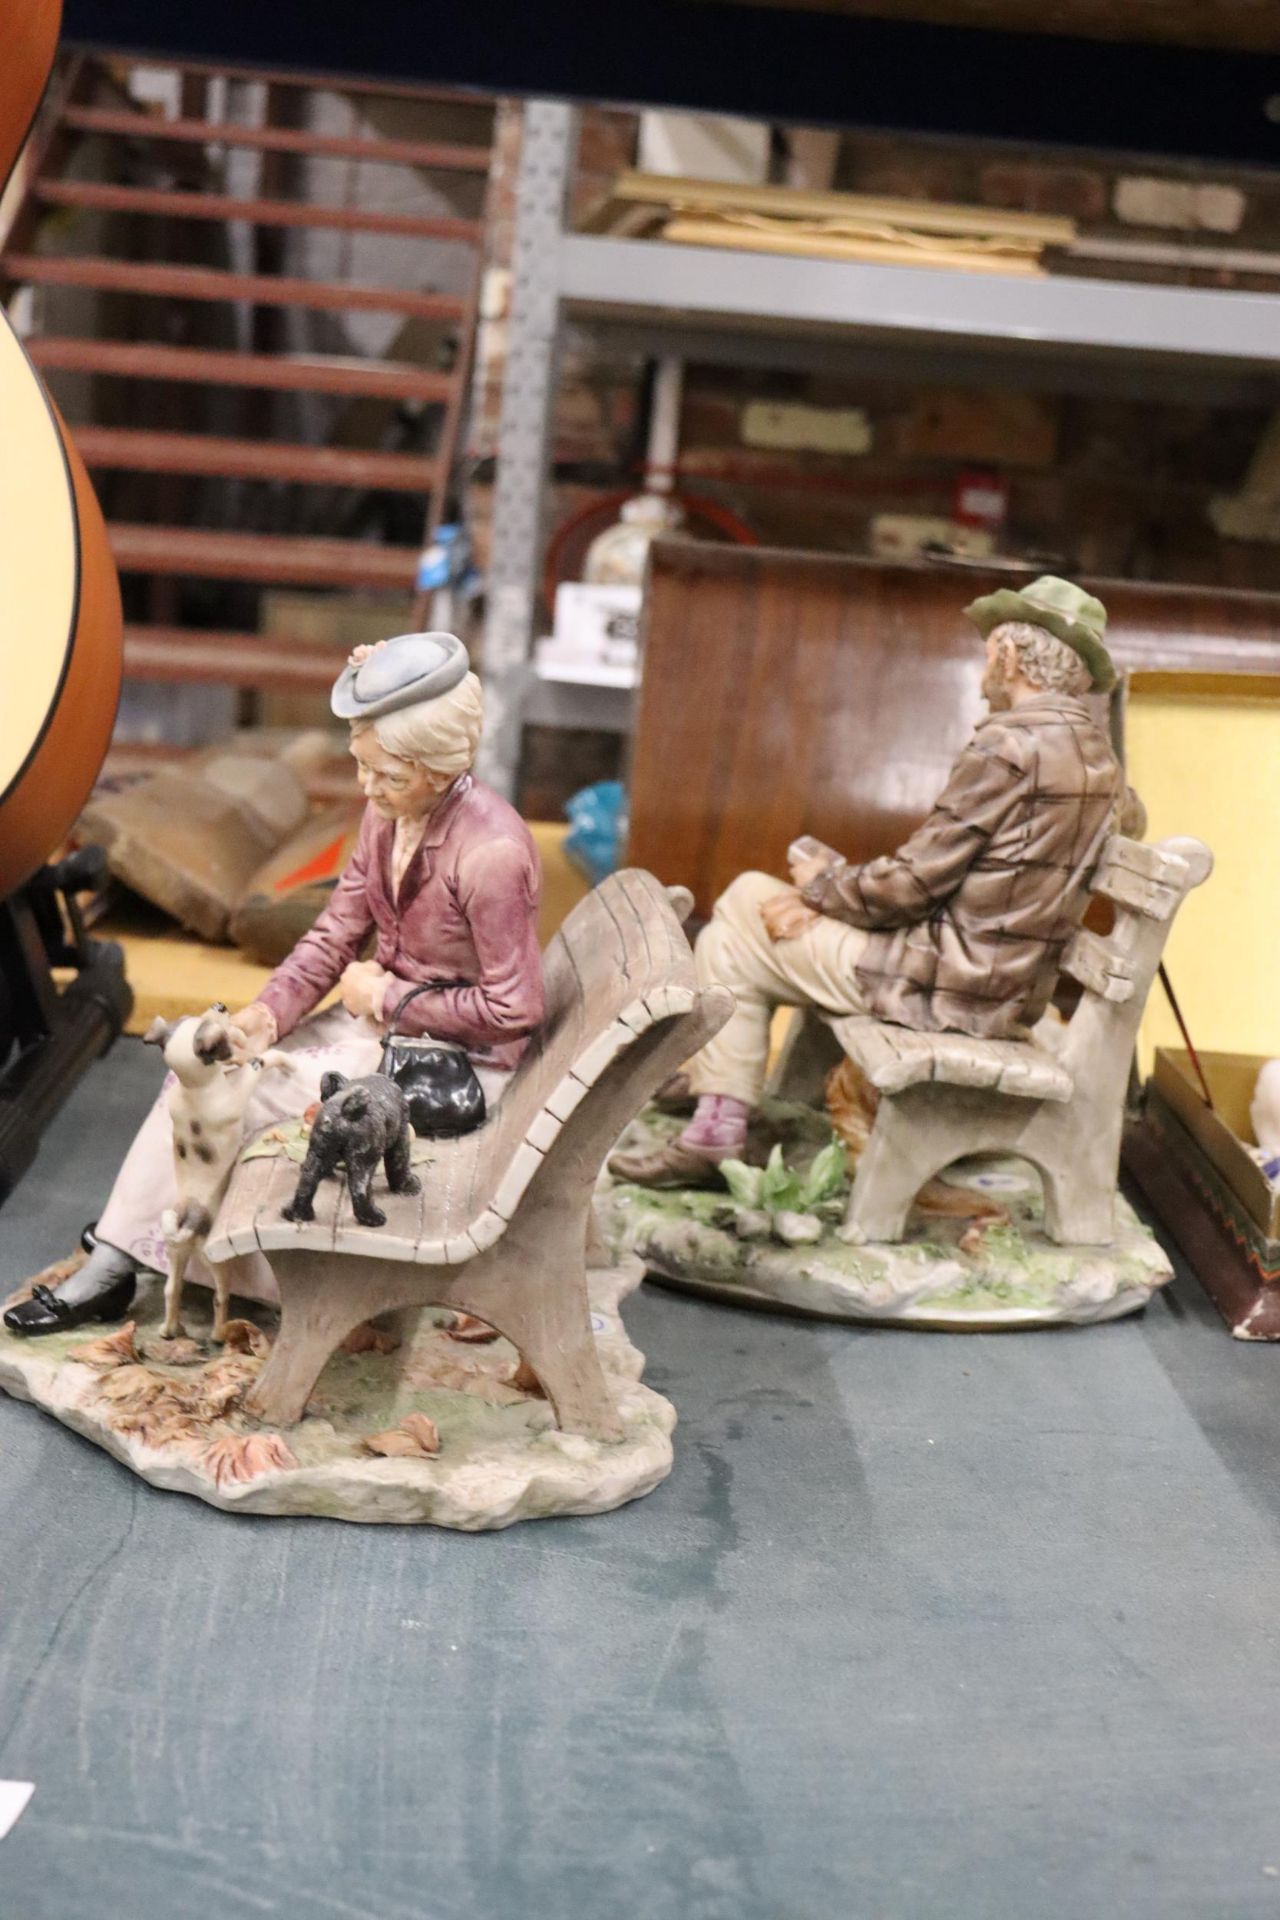 TWO CAPODIMONTE STYLE ORNAMENTS, A MAN ON A BENCH PLAYING CARDS AND A LAWITH DOGSDY ON A BENCH - Bild 4 aus 10